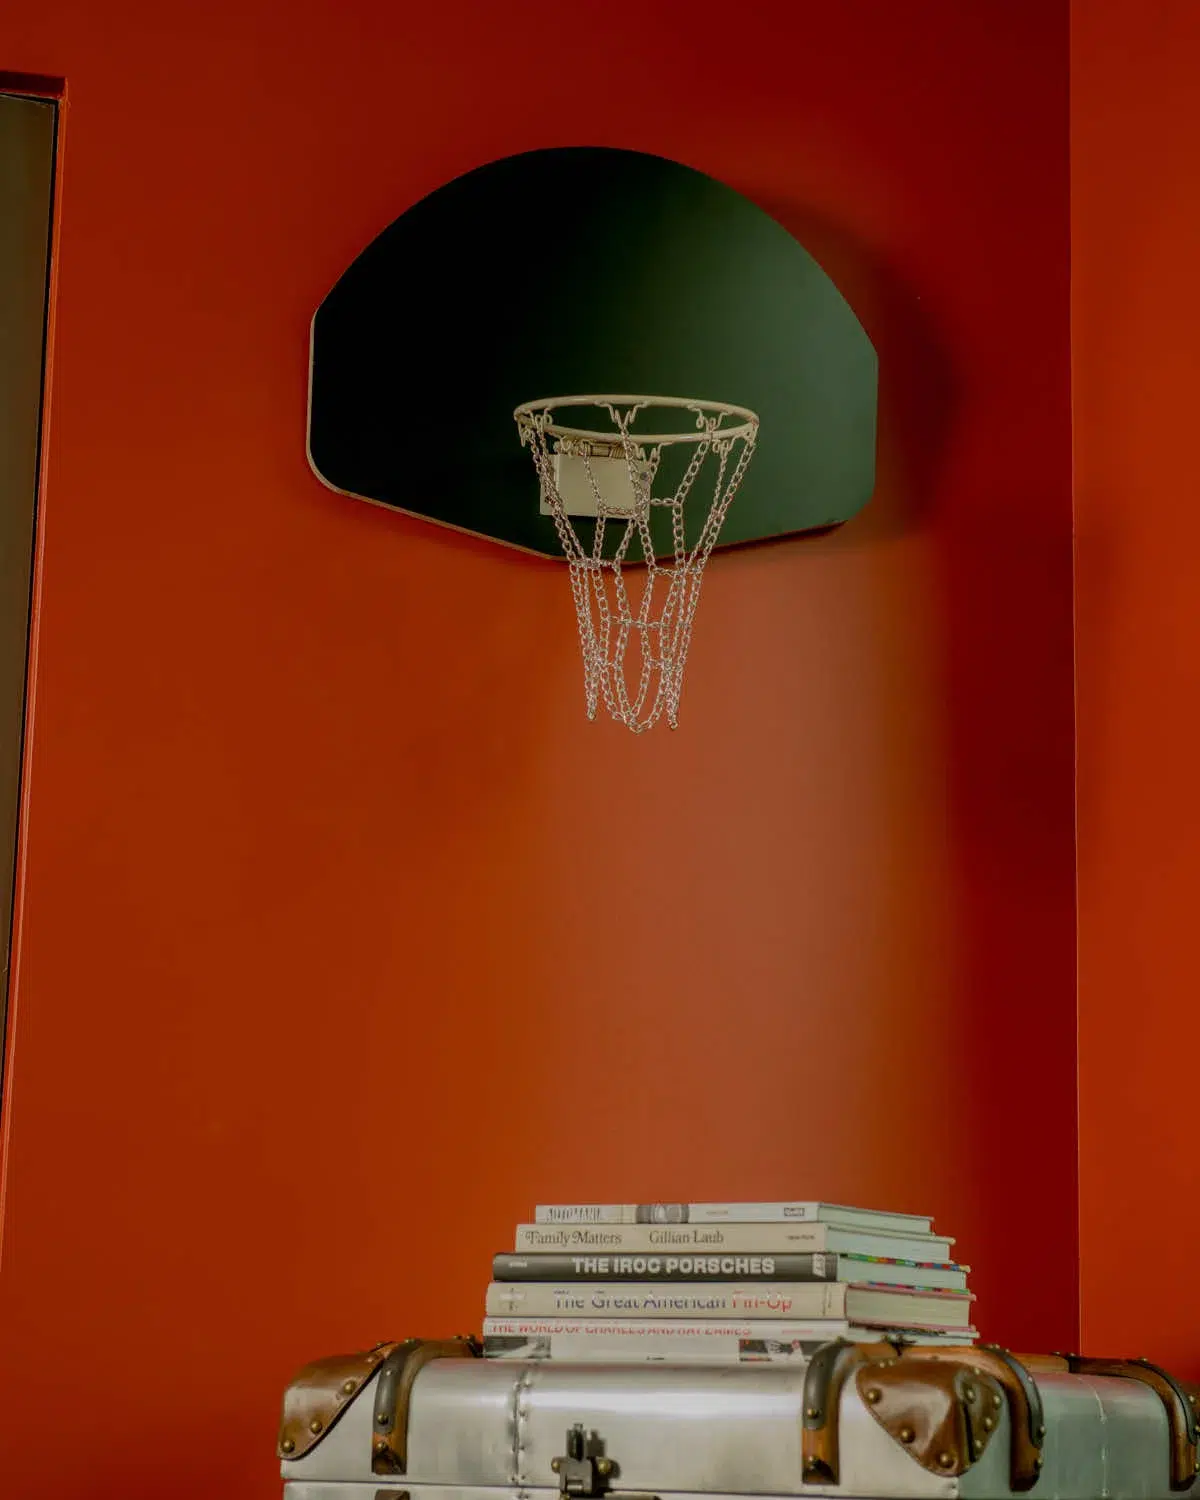 A Wooden Hoop Green in a room.